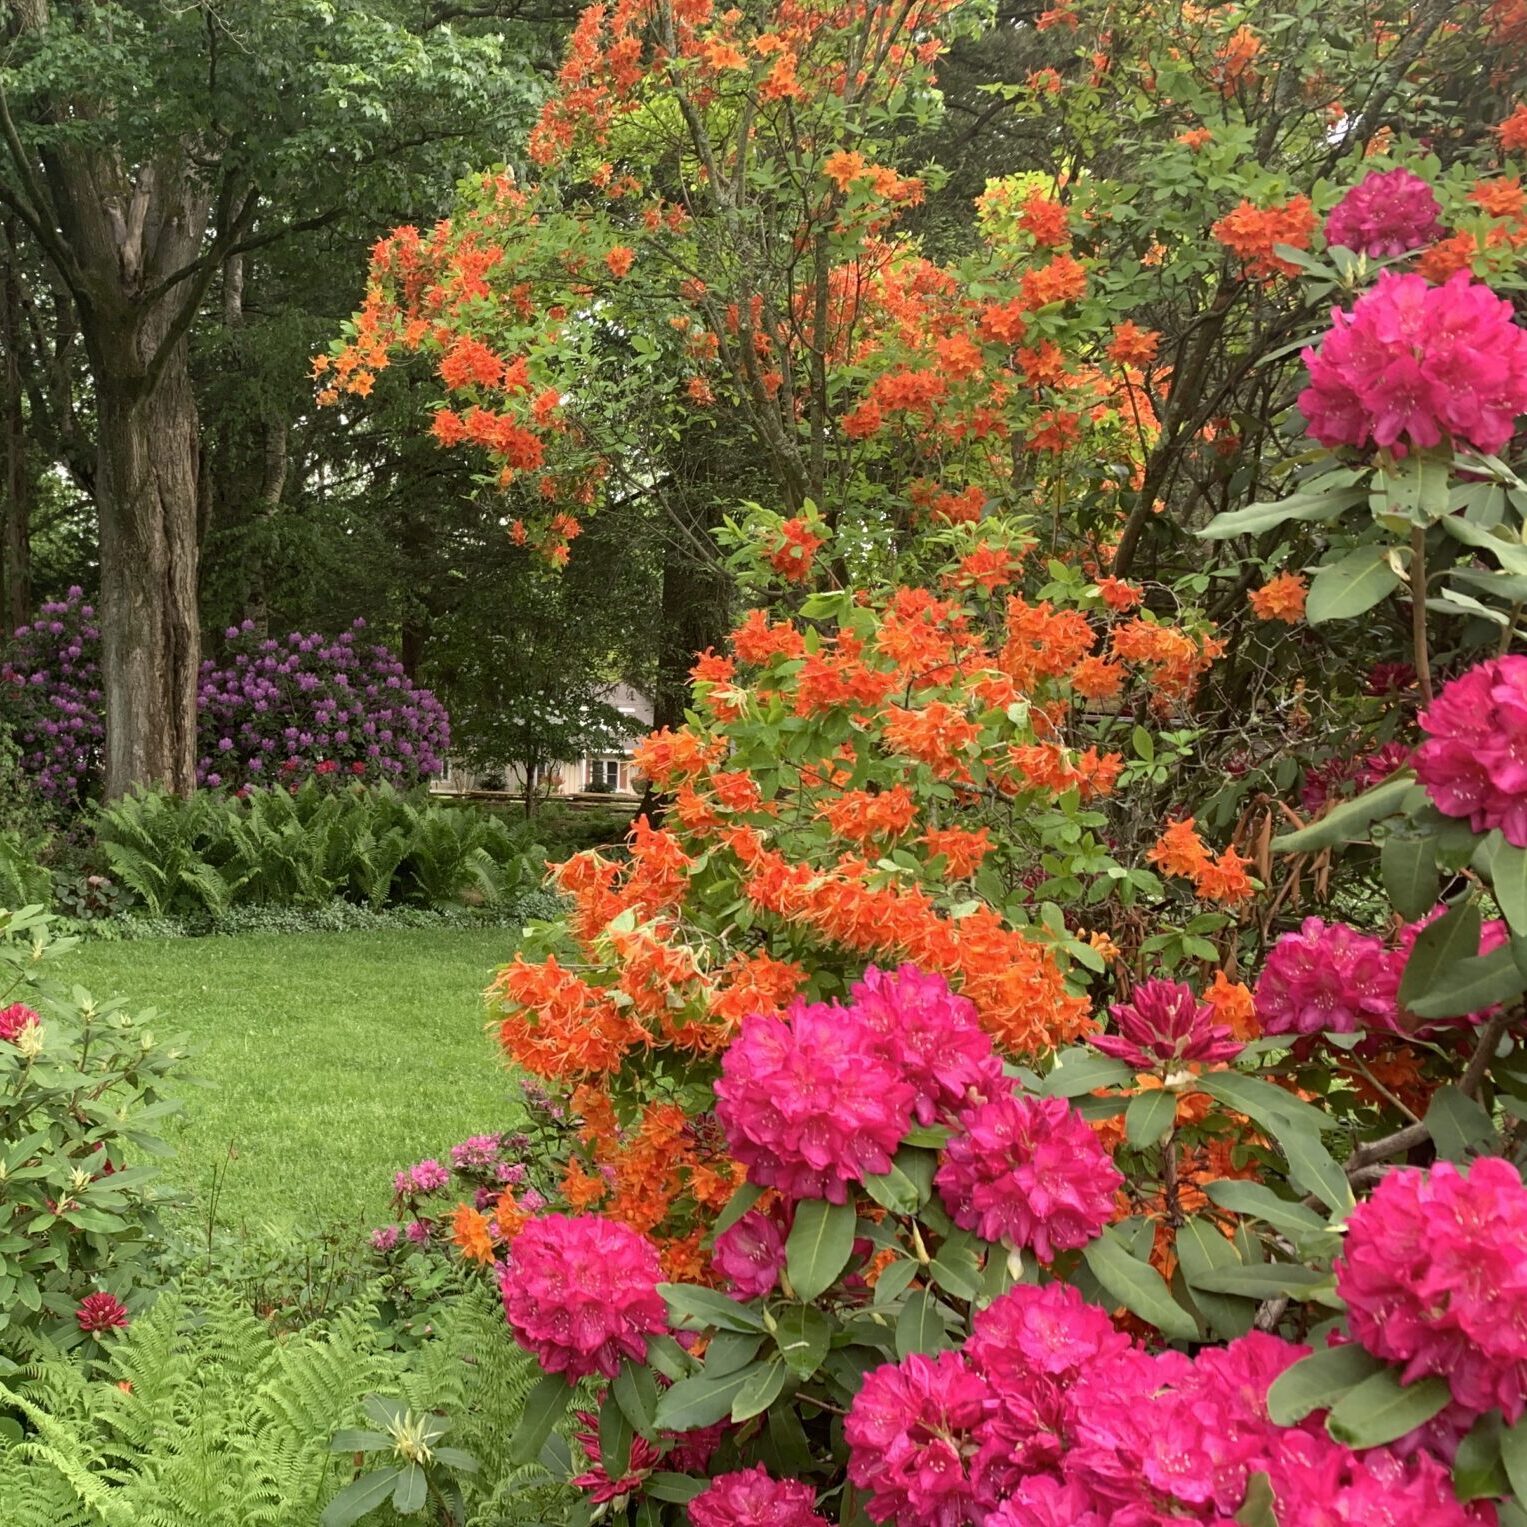 Bright pink, orange, and purple rhododendrons are in bloom at Goodell Gardens & Homestead